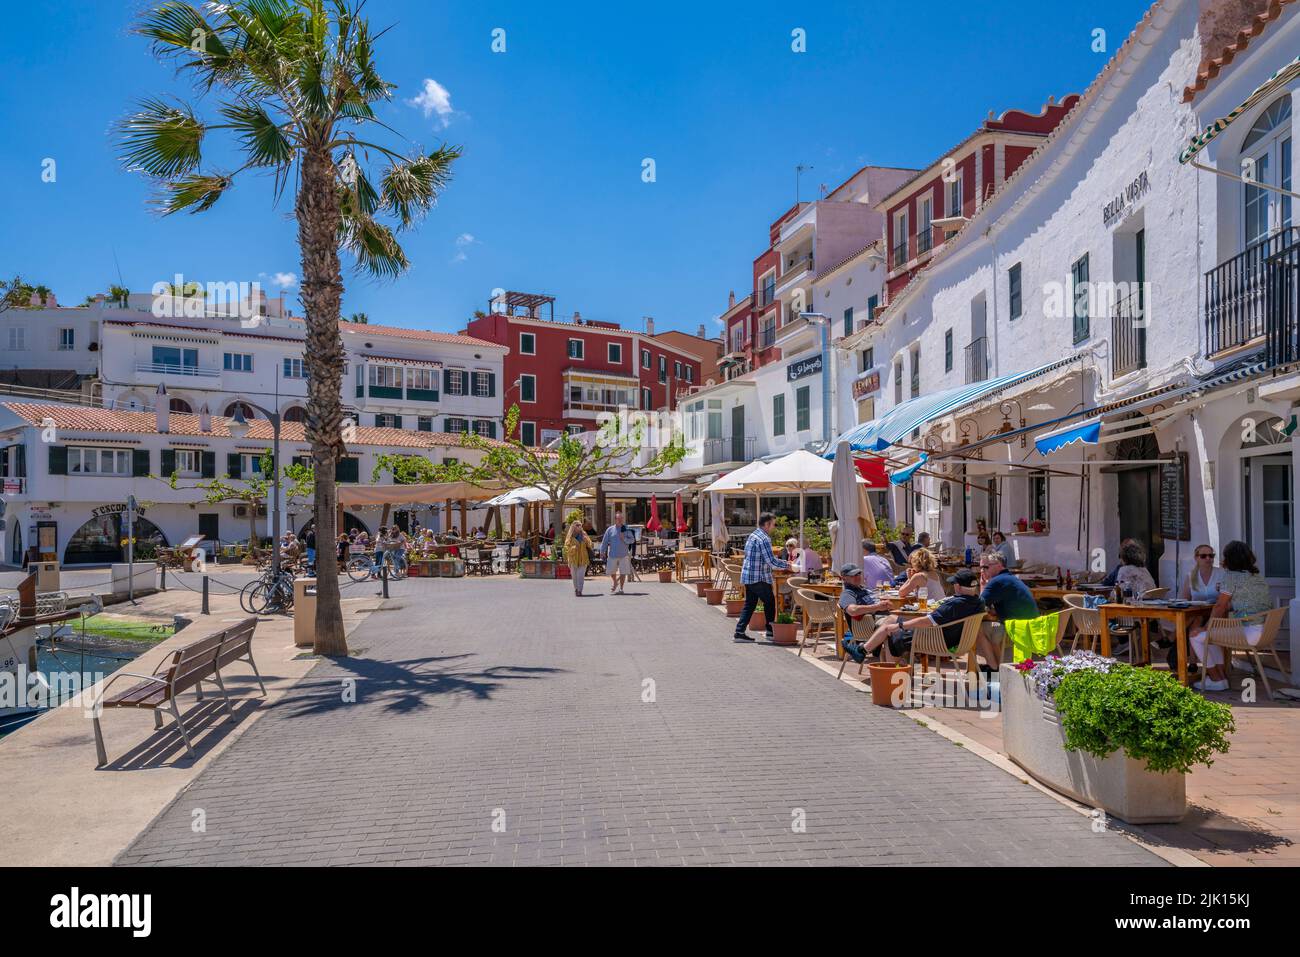 View of colourful cafes, restaurants in harbour against blue sky, Cales Fonts, Menorca, Balearic Islands, Spain, Mediterranean, Europe Stock Photo